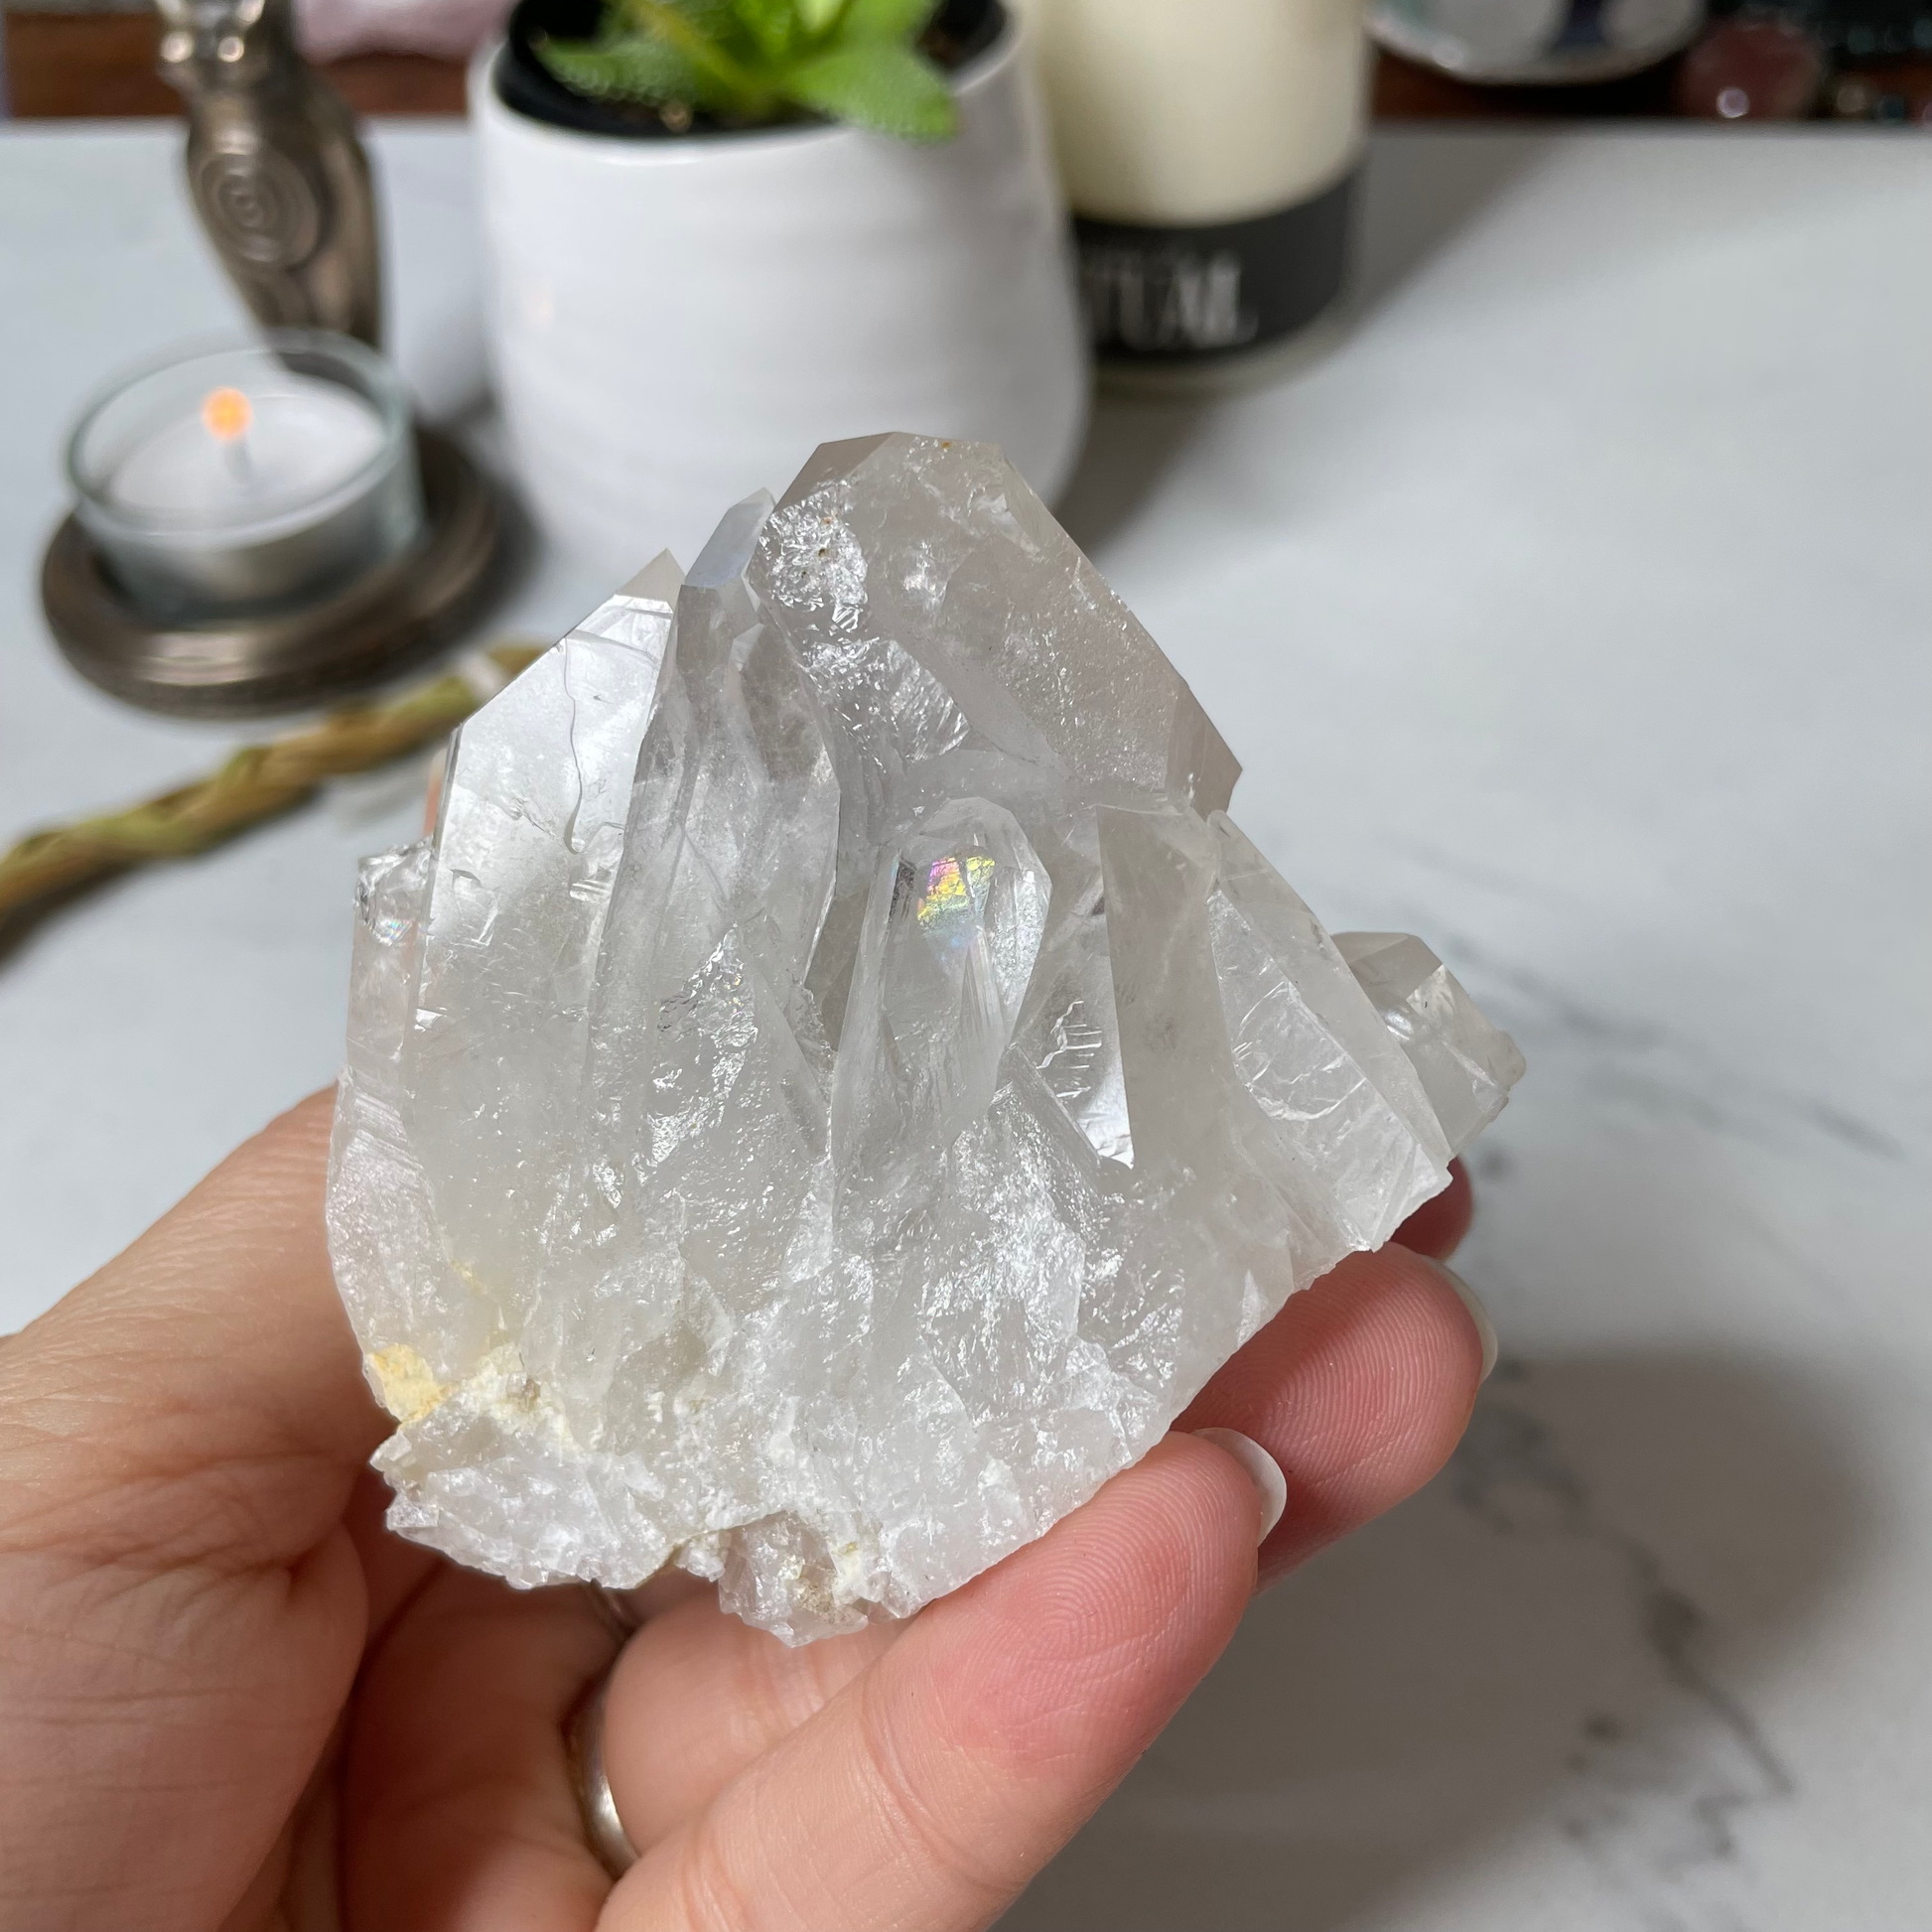 Freya's Haven | Metaphysical & Crystal shop | A close up photo of a Clear Quartz Cluster held in a woman's hand with candles in the background. A rainbow can be seen inside one of the crystal's points.